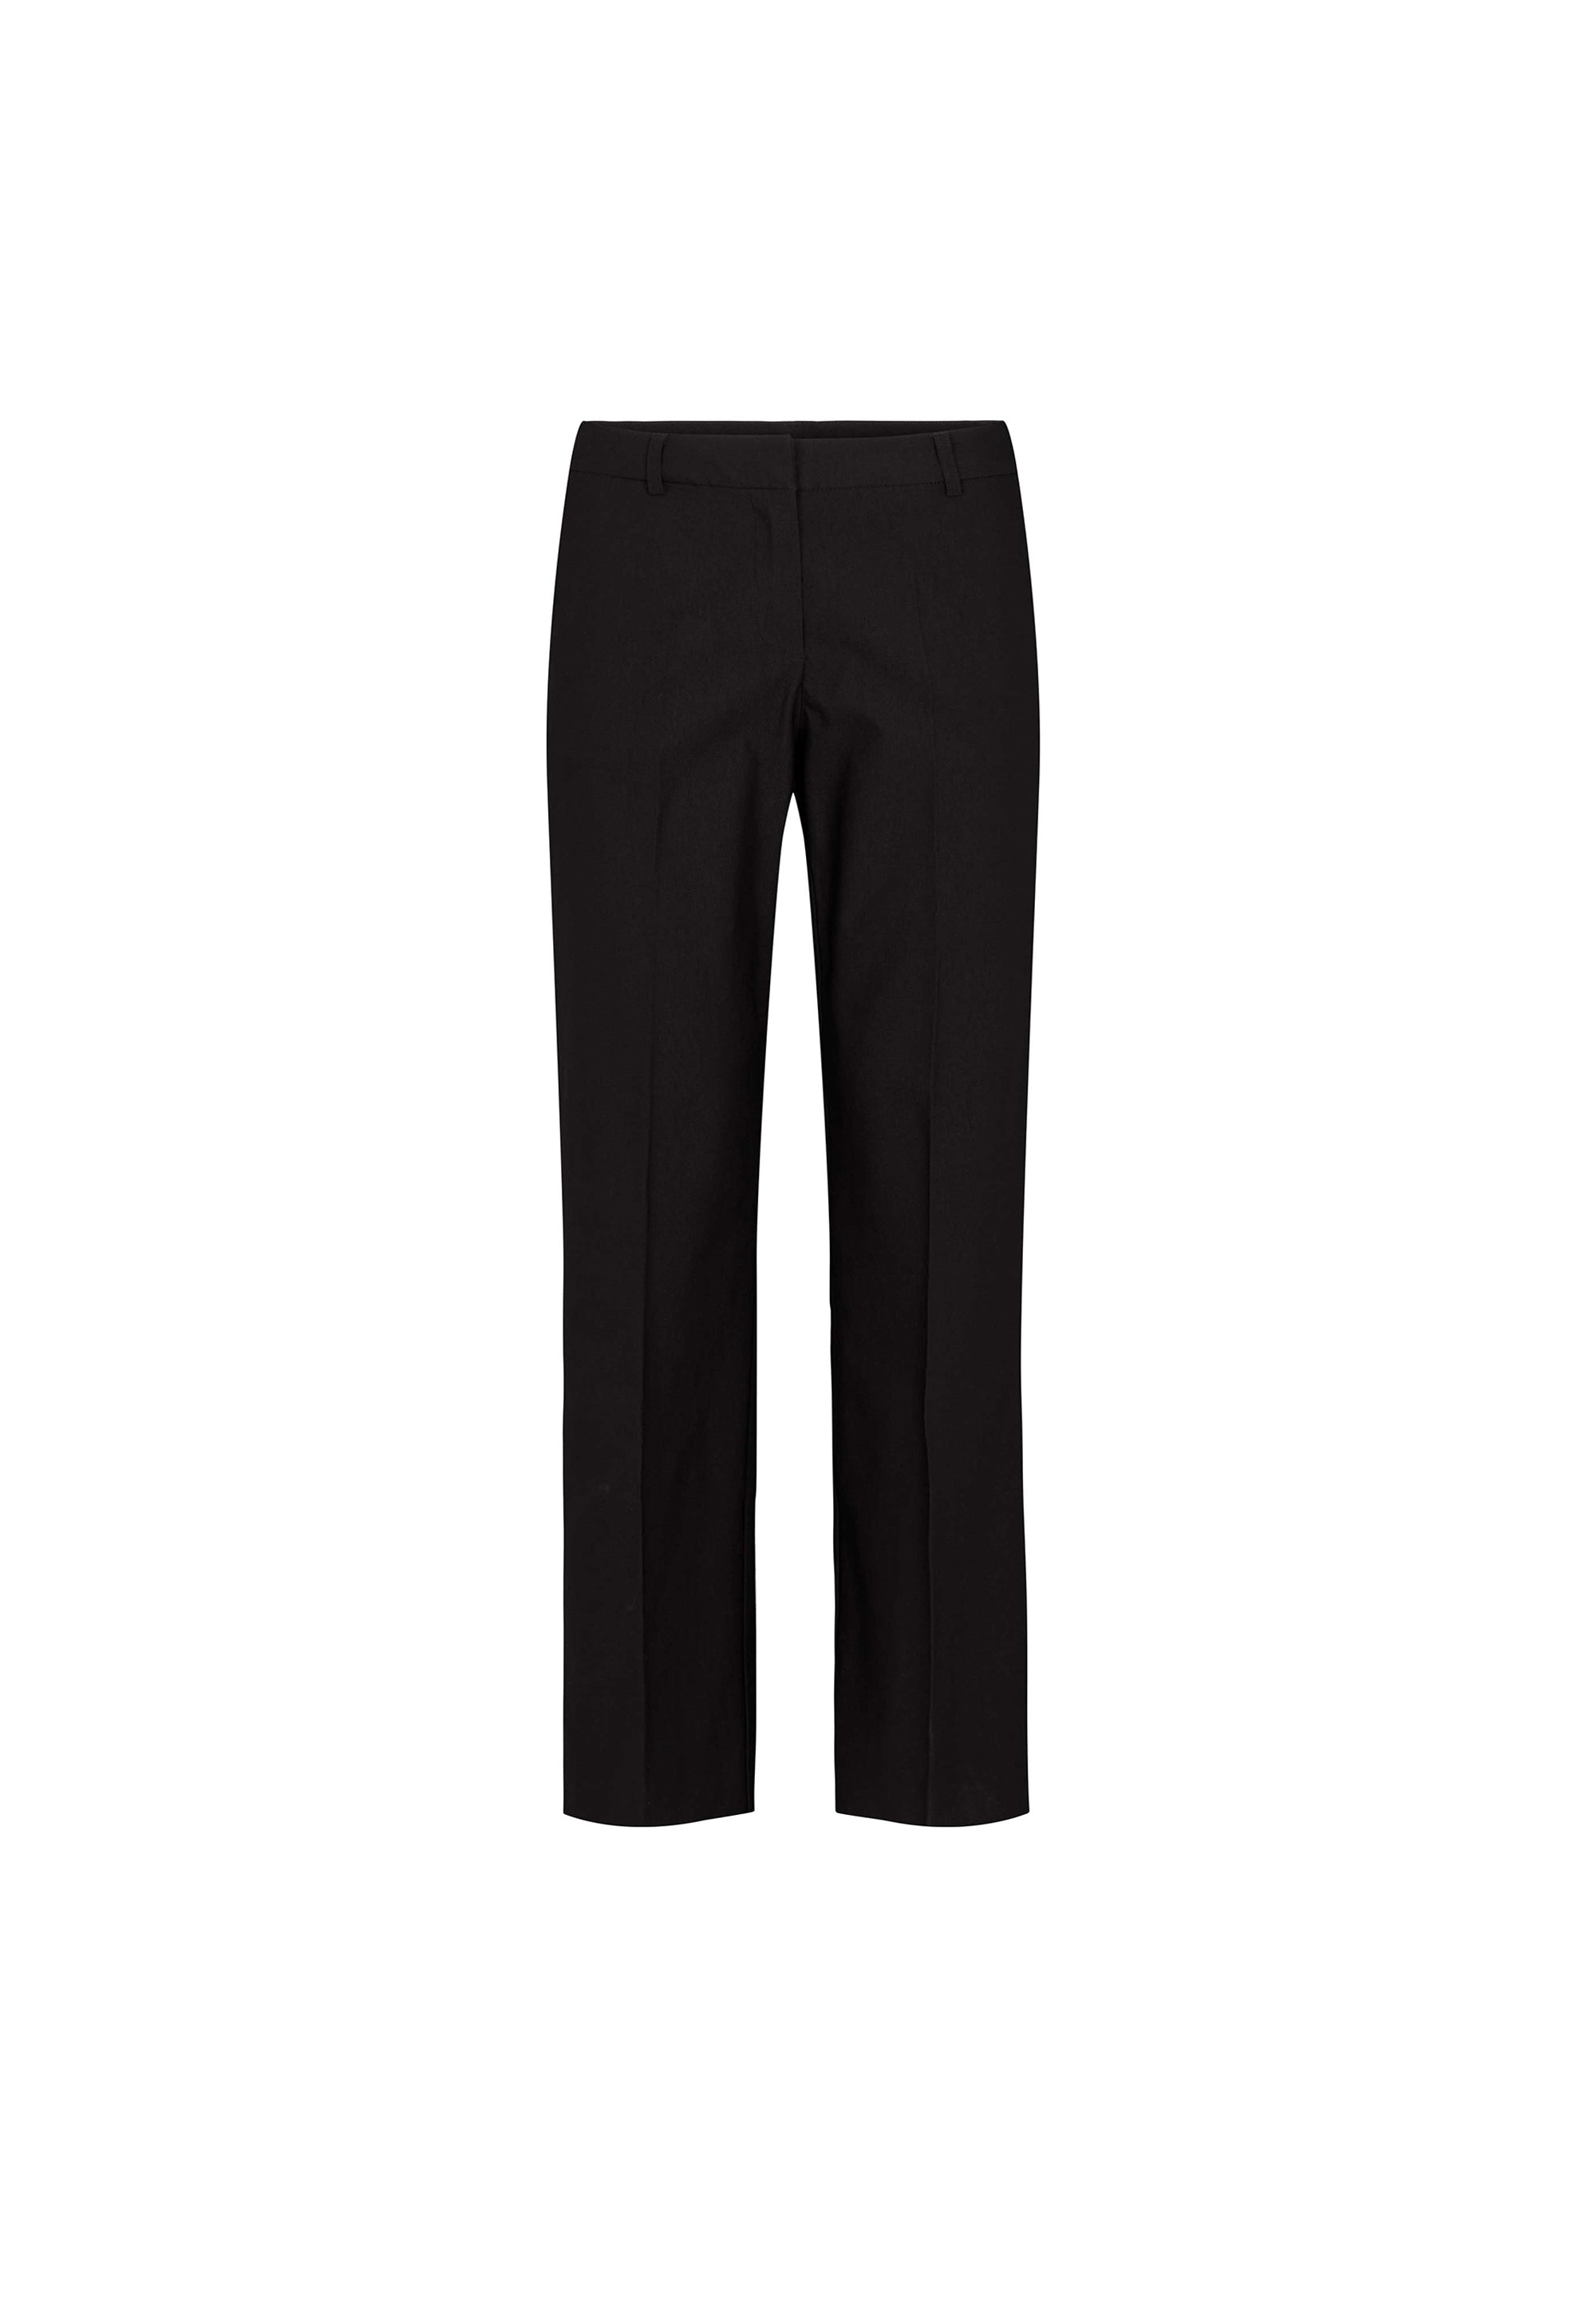 LAURIE Judy Straight - Medium Length Trousers STRAIGHT 99971 Black Brushed